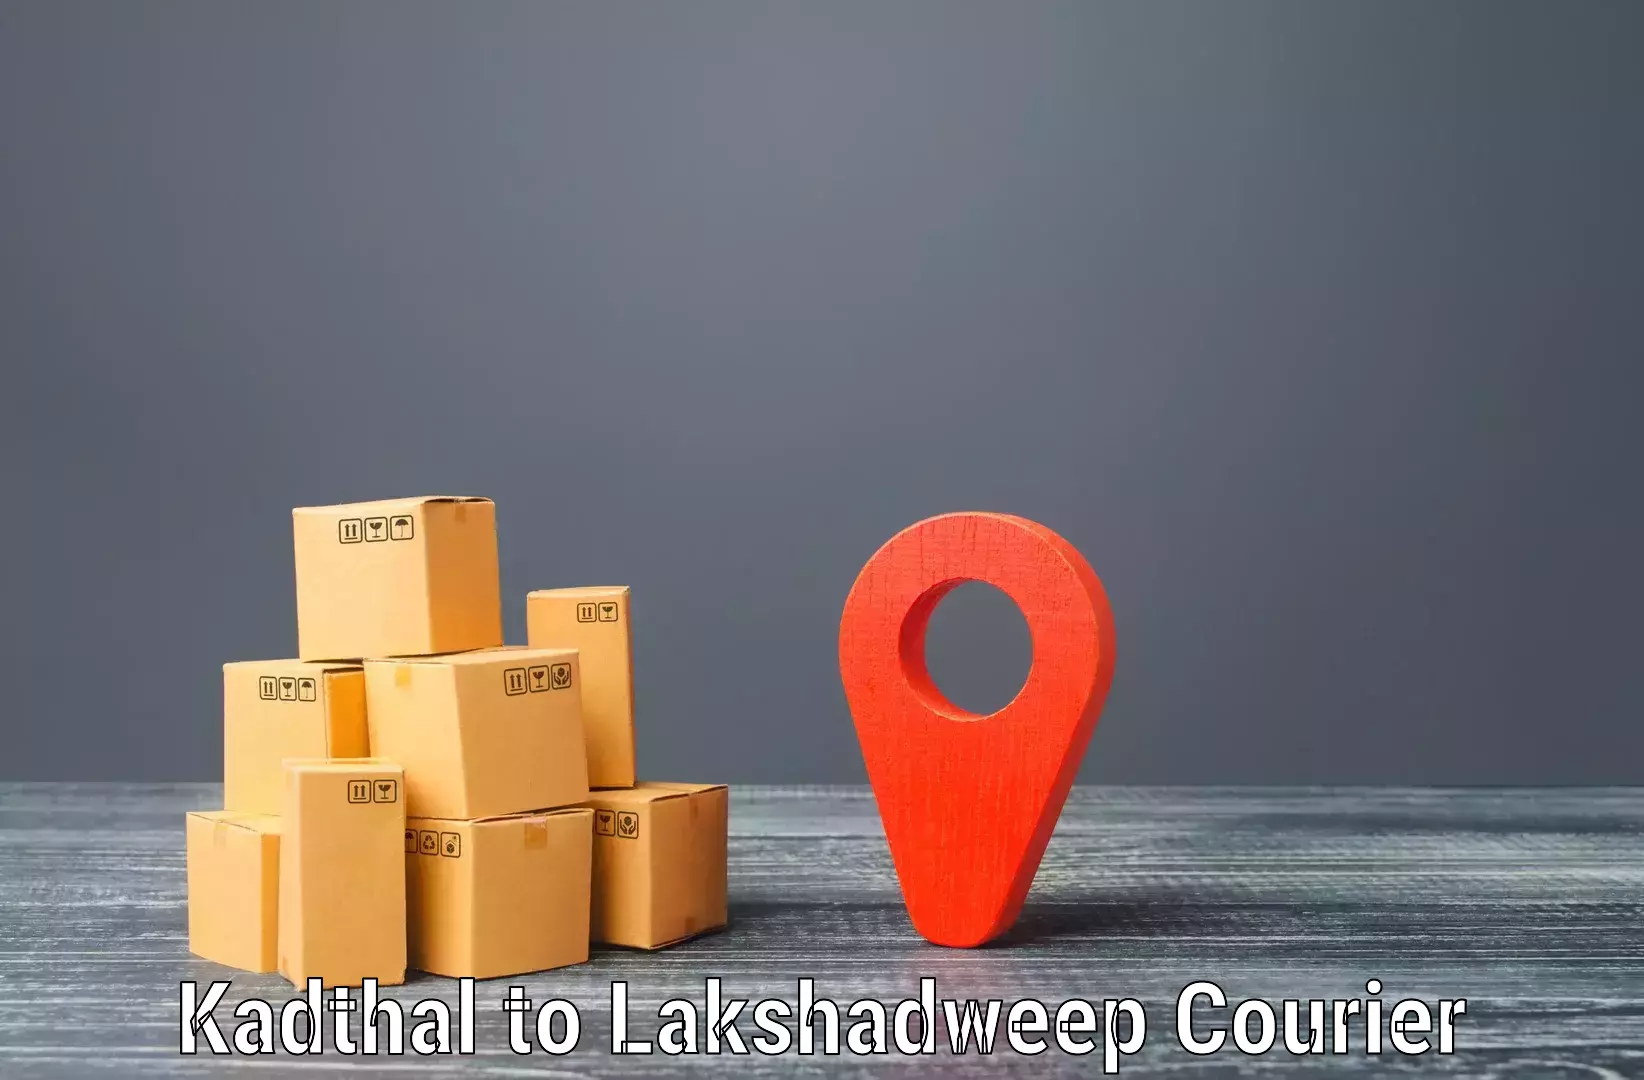 Personalized courier solutions Kadthal to Lakshadweep